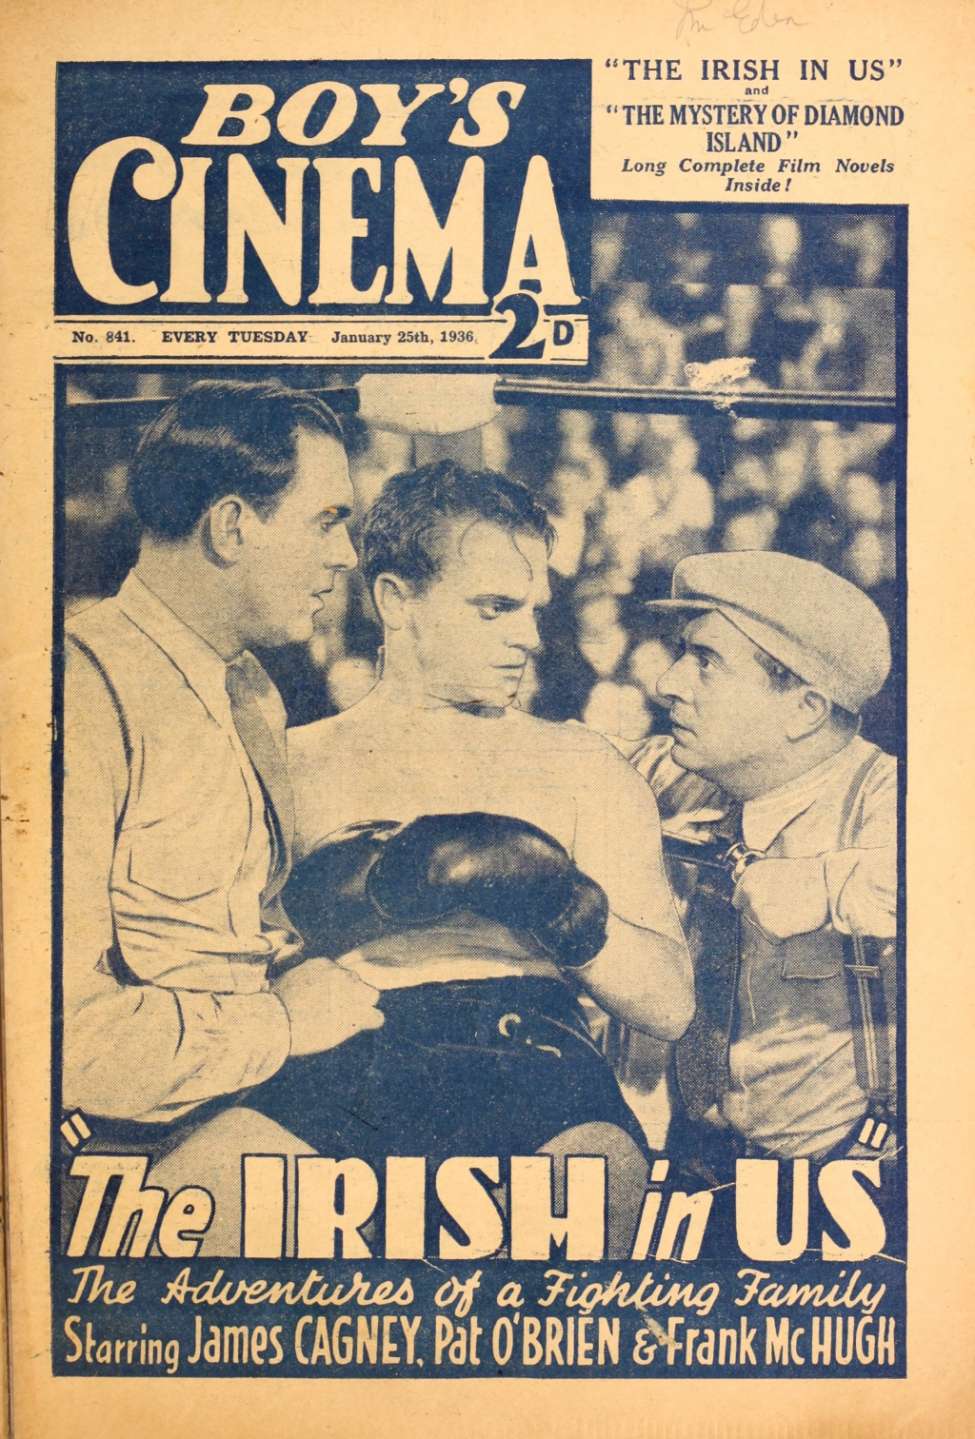 Book Cover For Boy's Cinema 841 - The Irish in Us - James Cagney